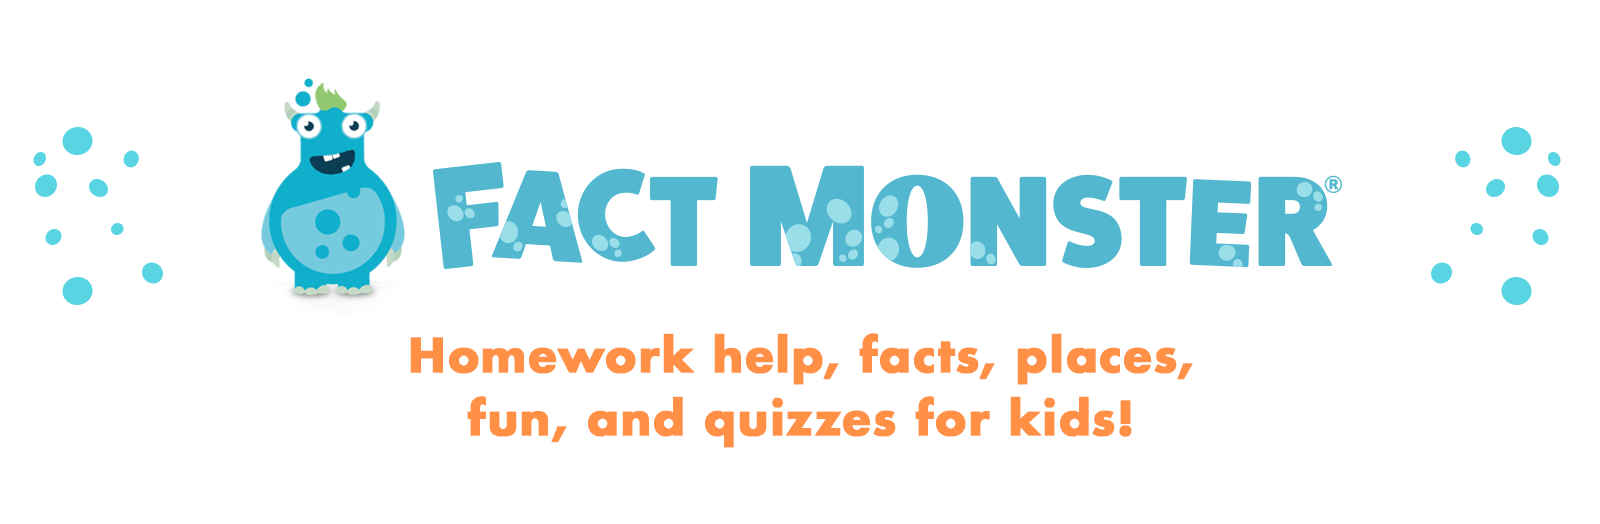 Fact Monster - Homework help, facts, places, fun, and quizzes for kids!, 